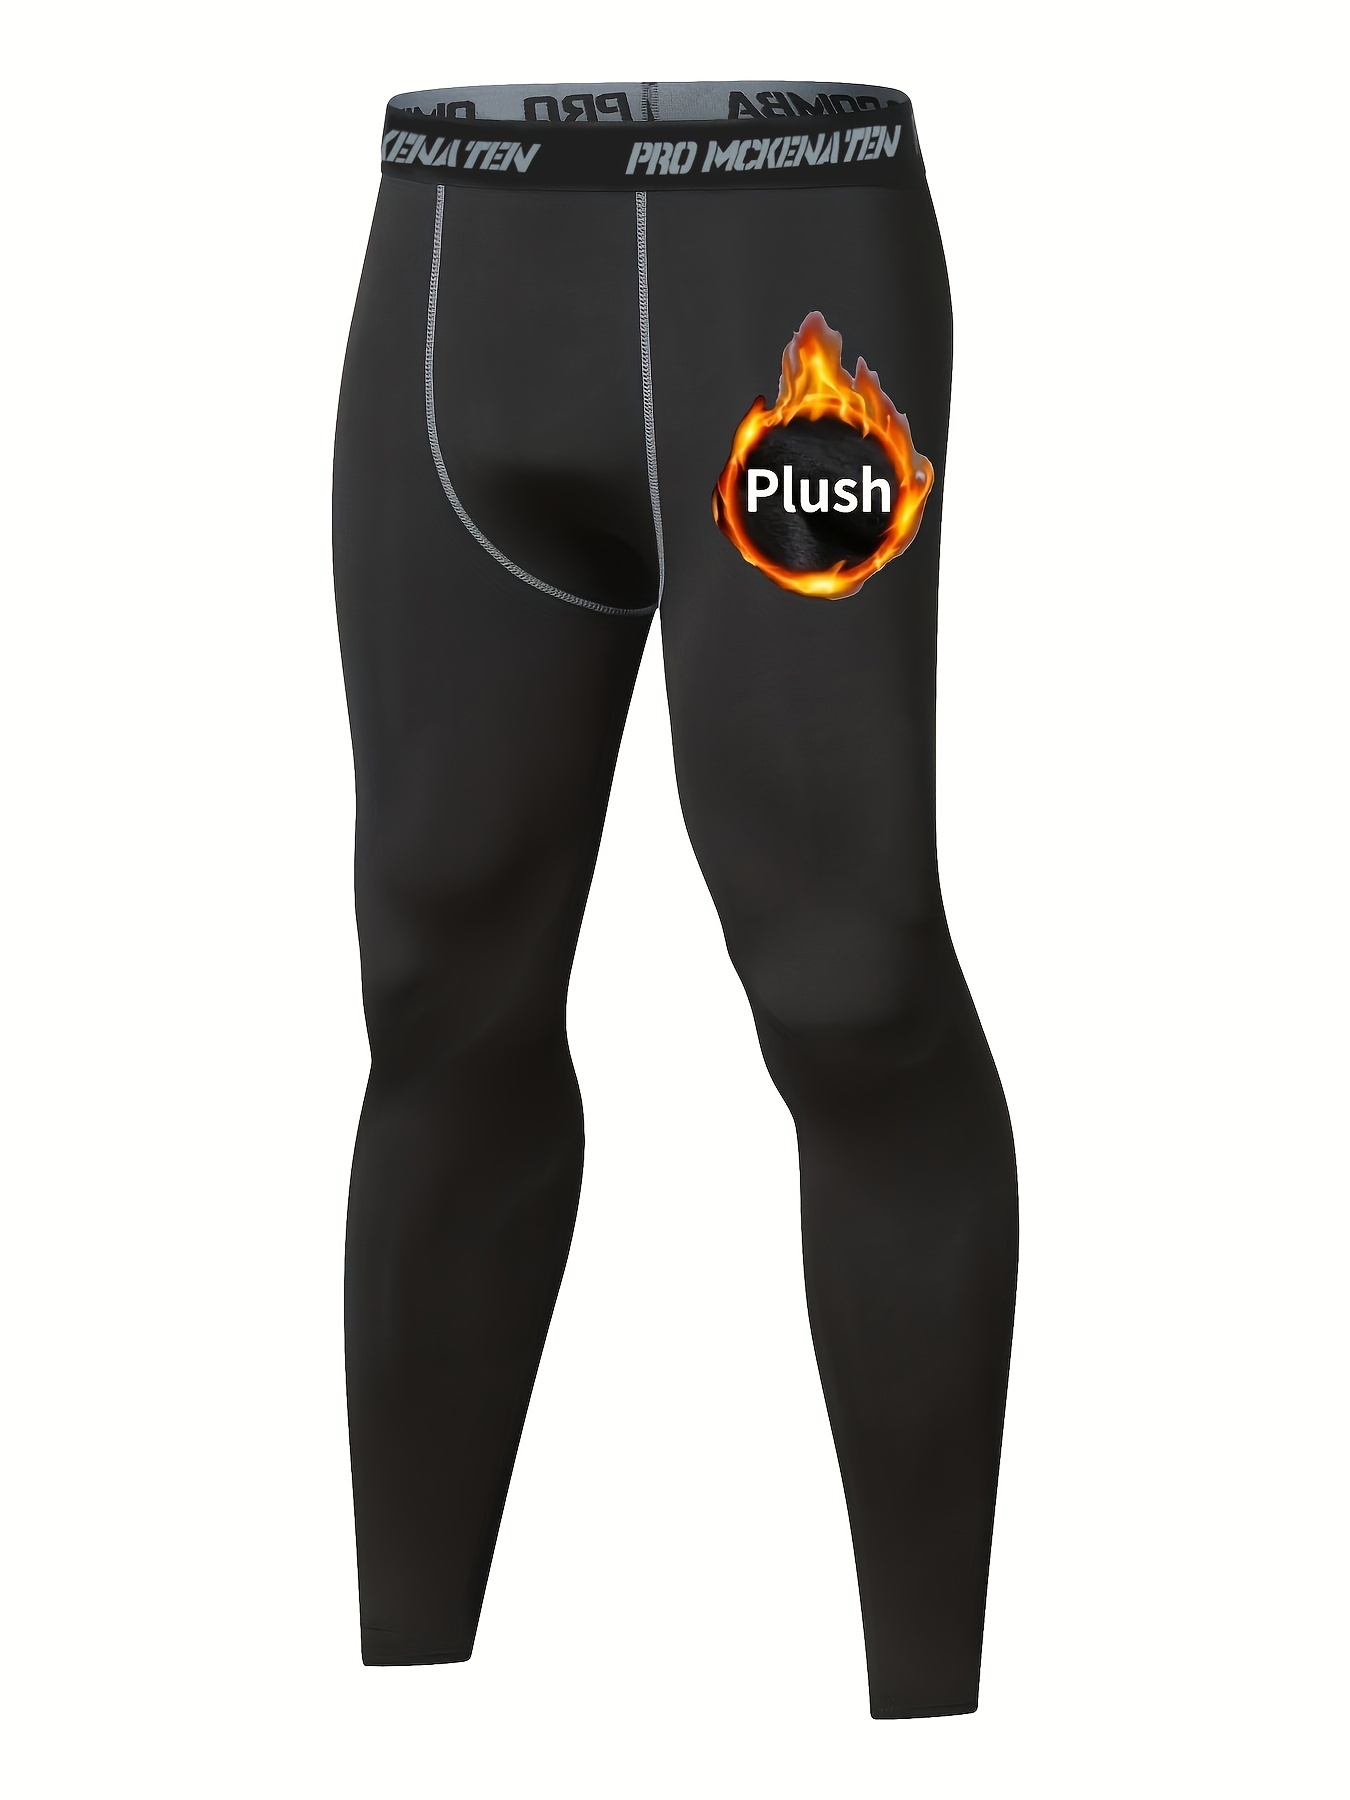 Mens Mid Waist Thermal Compression Leggings With Wide Elastic Waristband  For Warm Sleep And Pajamas From Youmiguo, $14.46